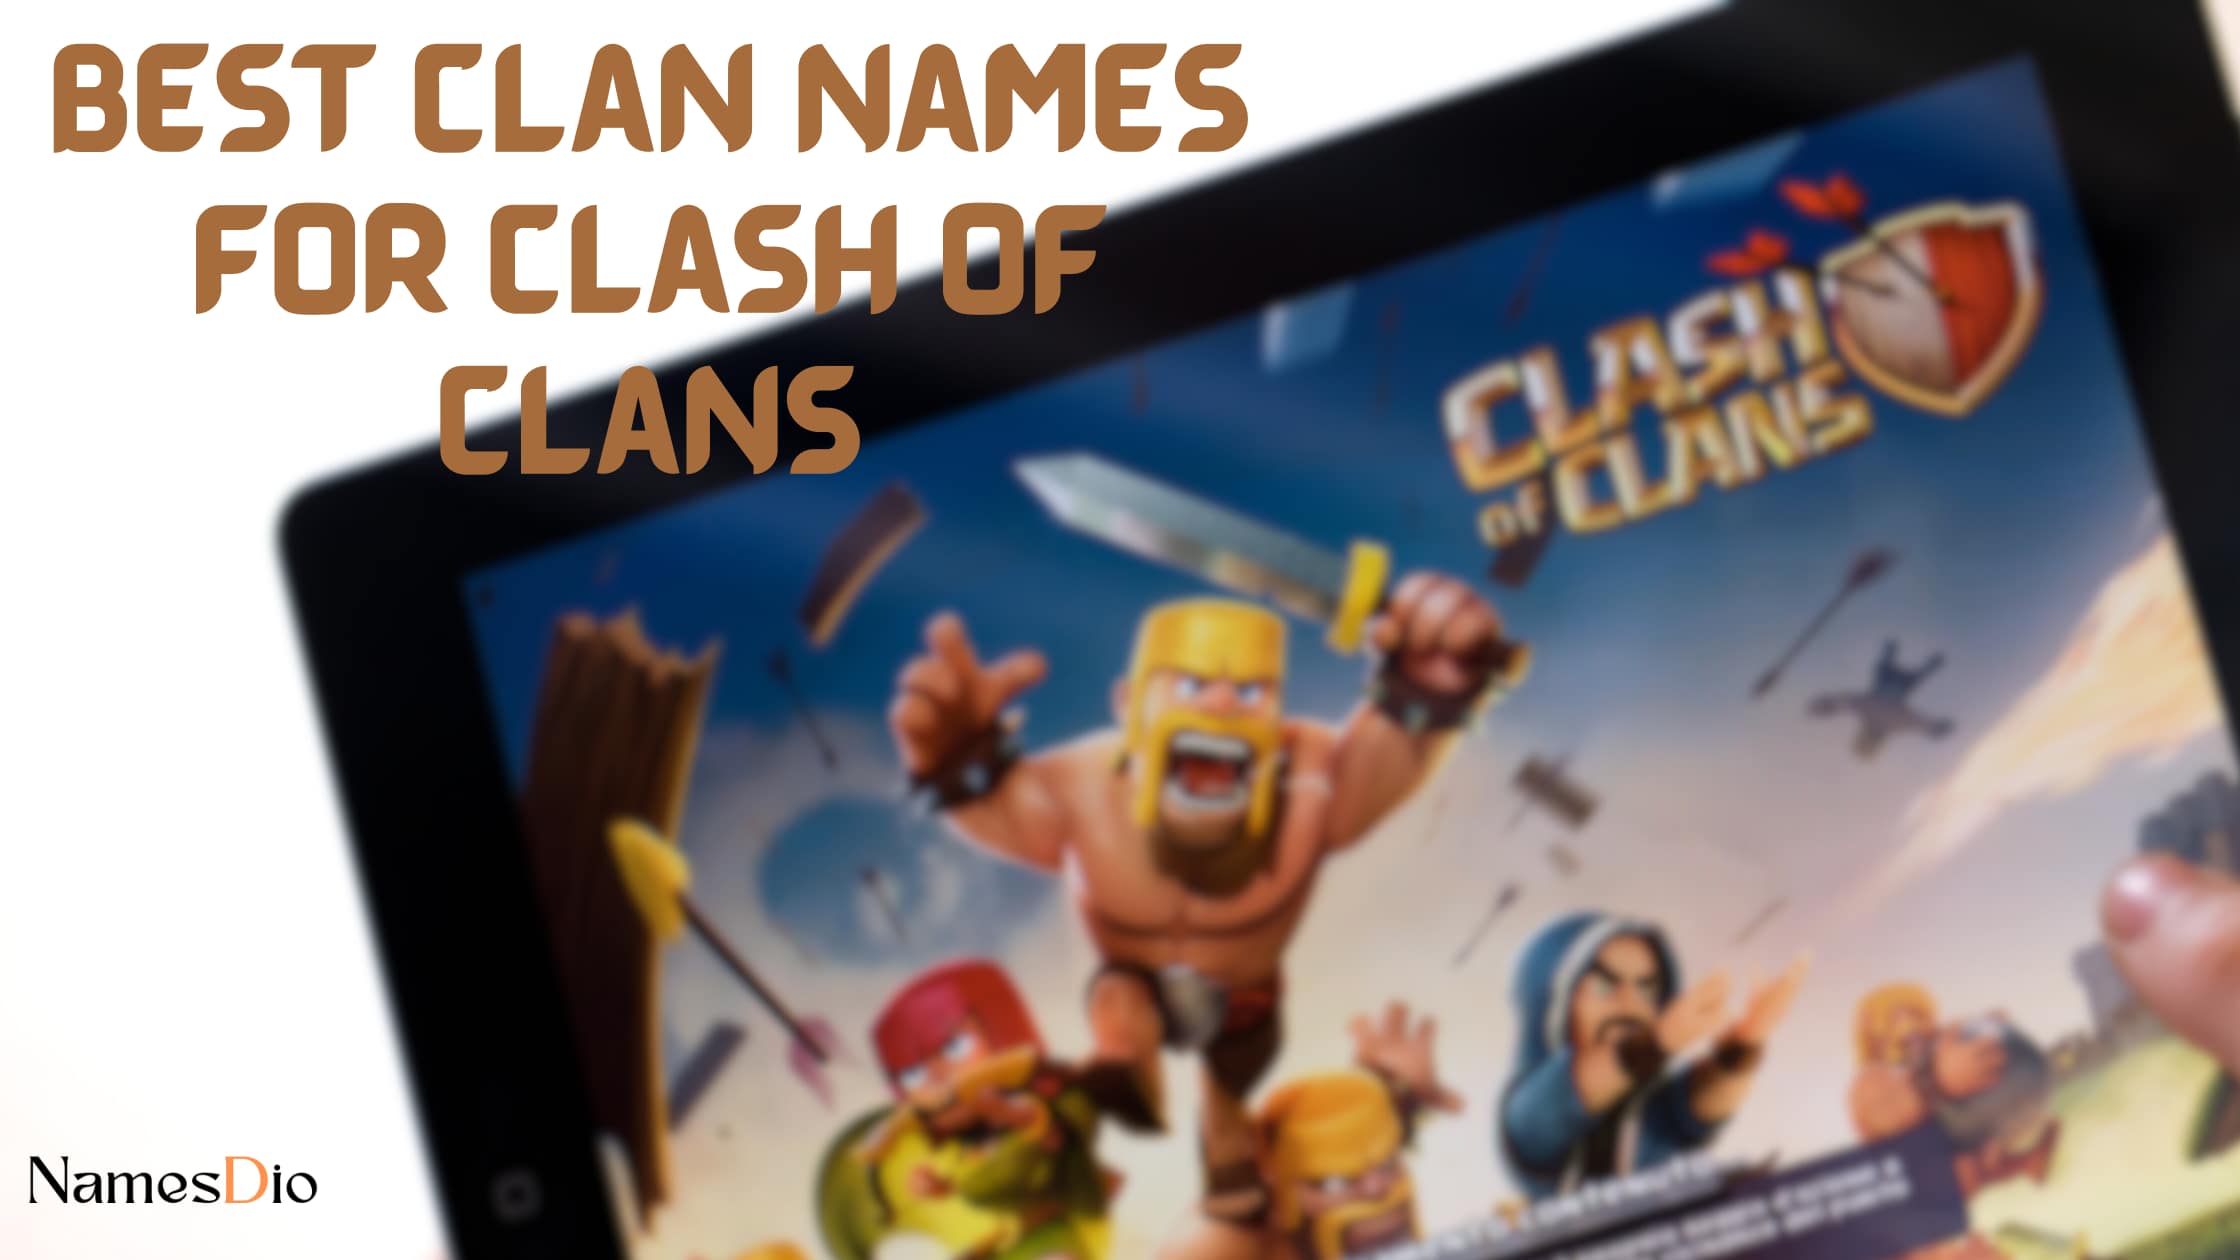 Best-Clan-Names-for-Clash-of-Clans